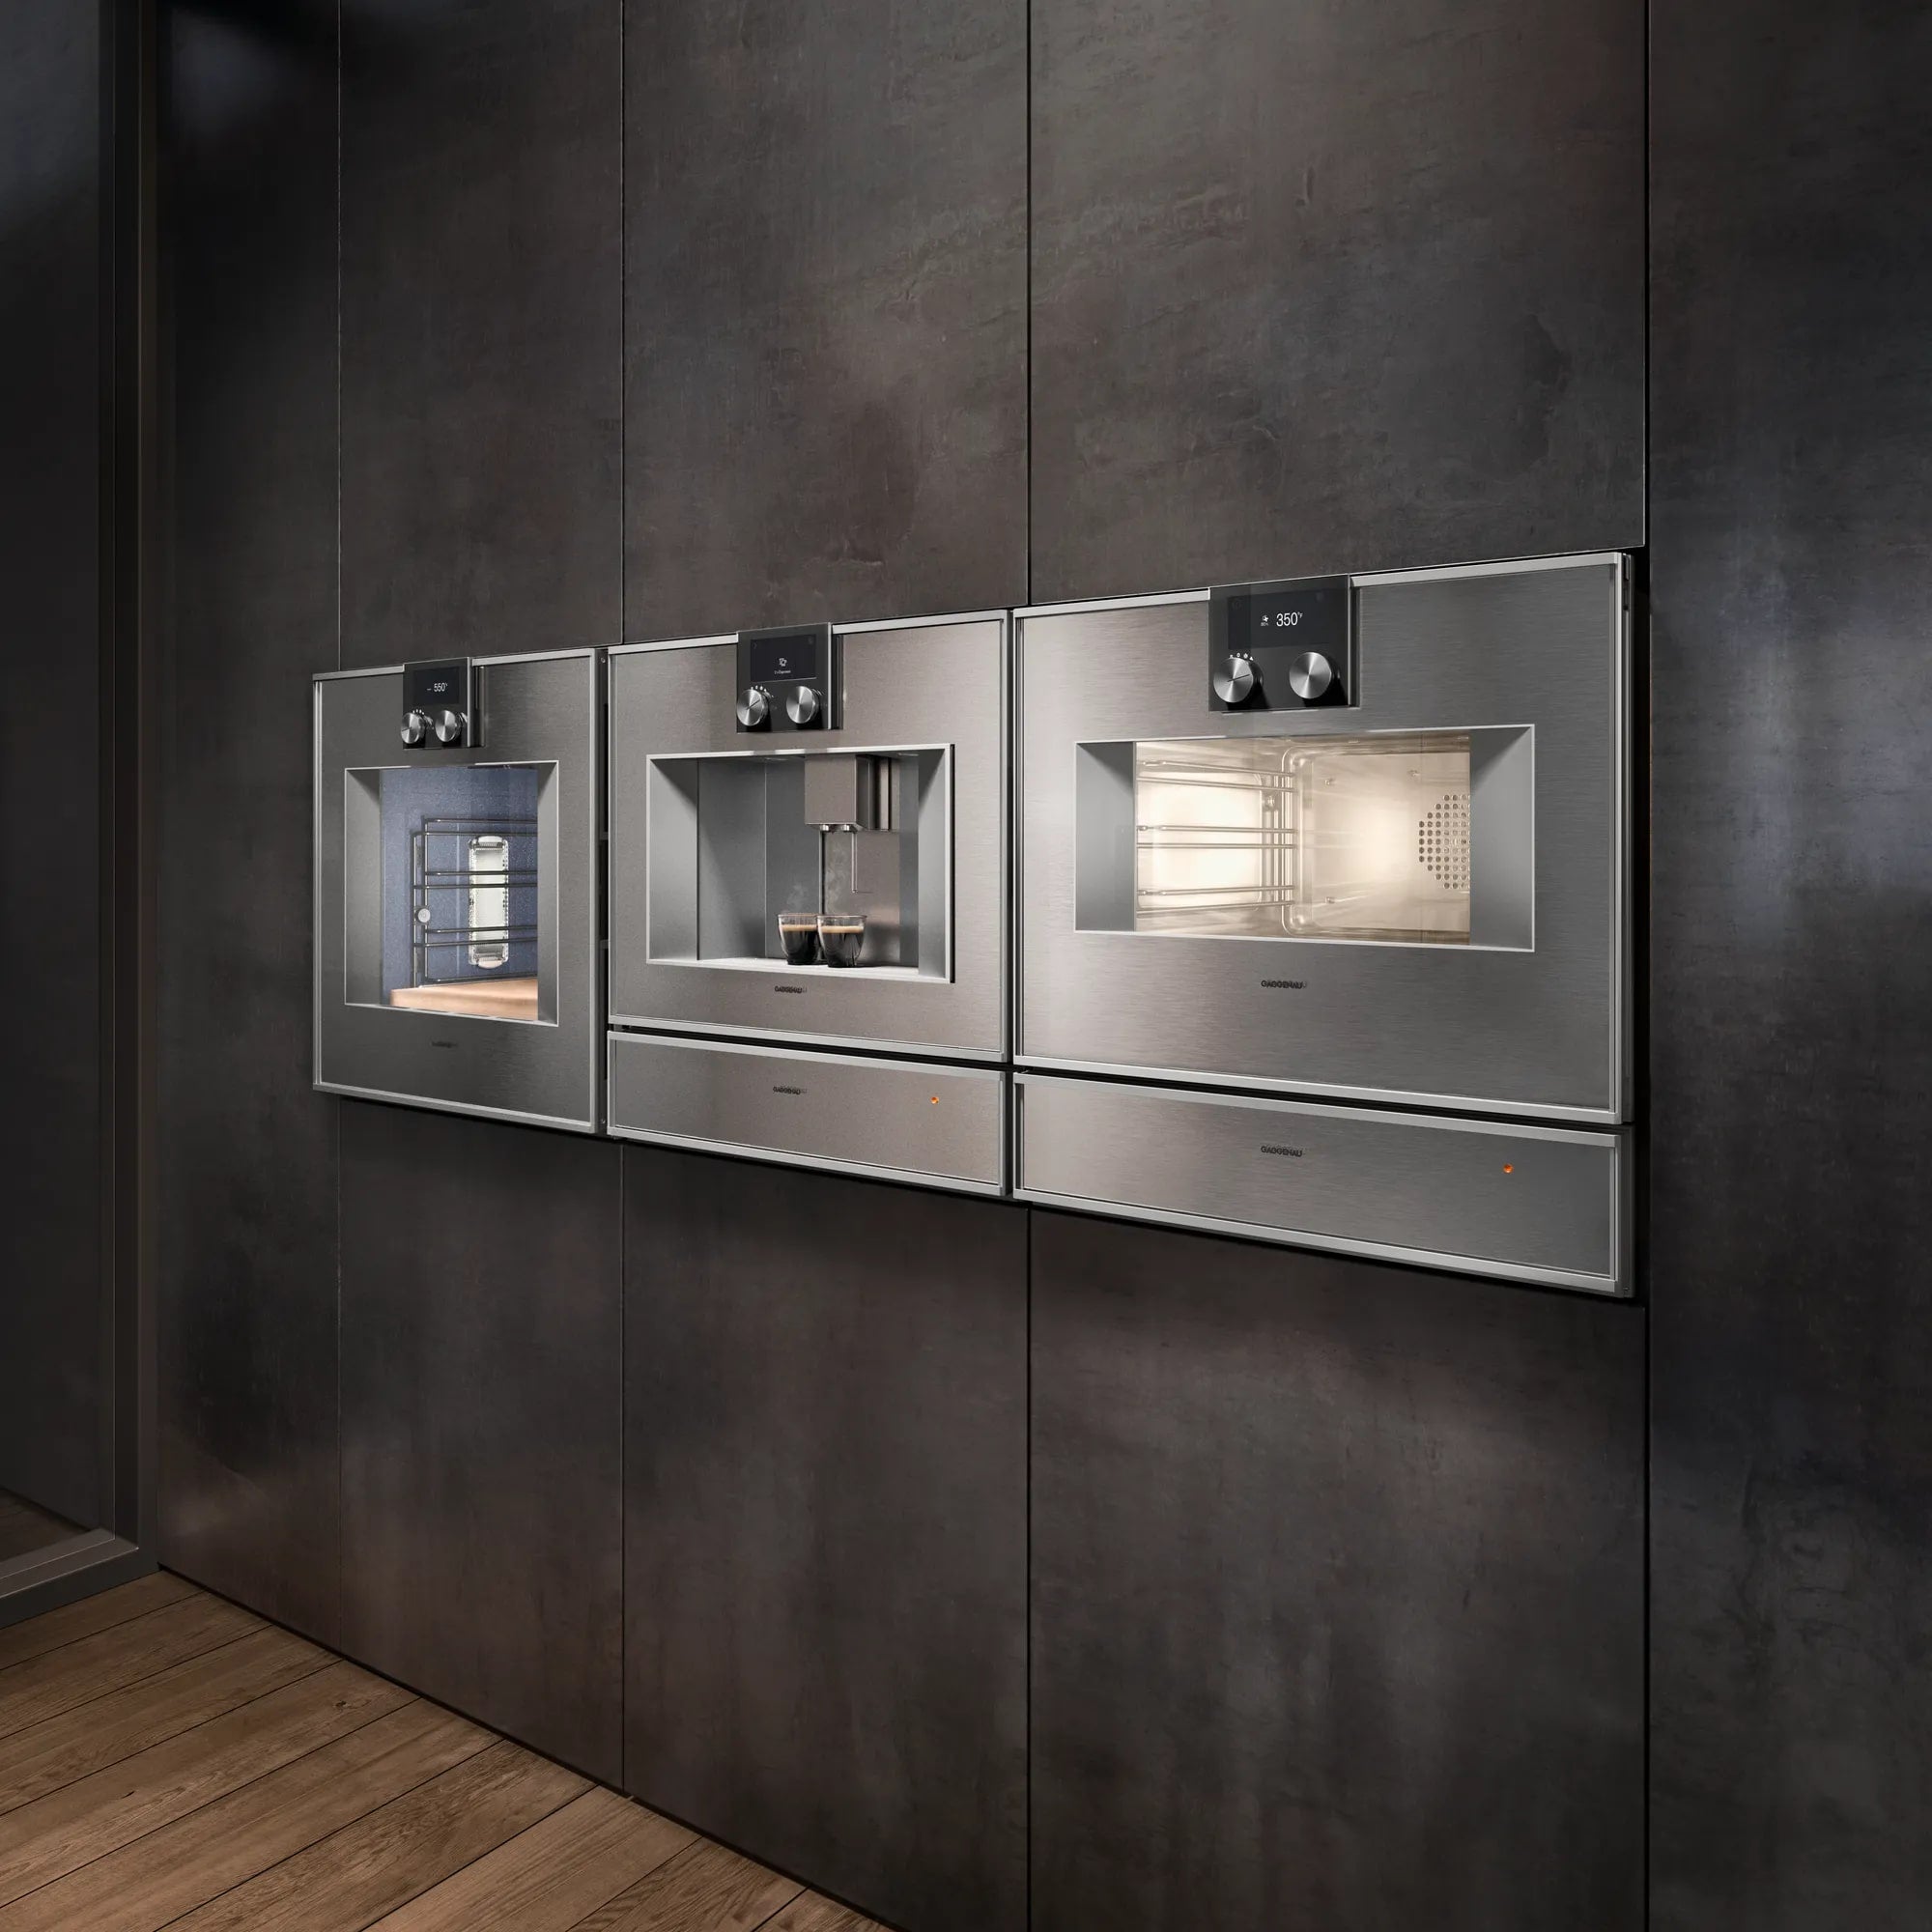 Gaggenau - 3.2 cu. ft Single Wall Oven in Stainless - BO451612